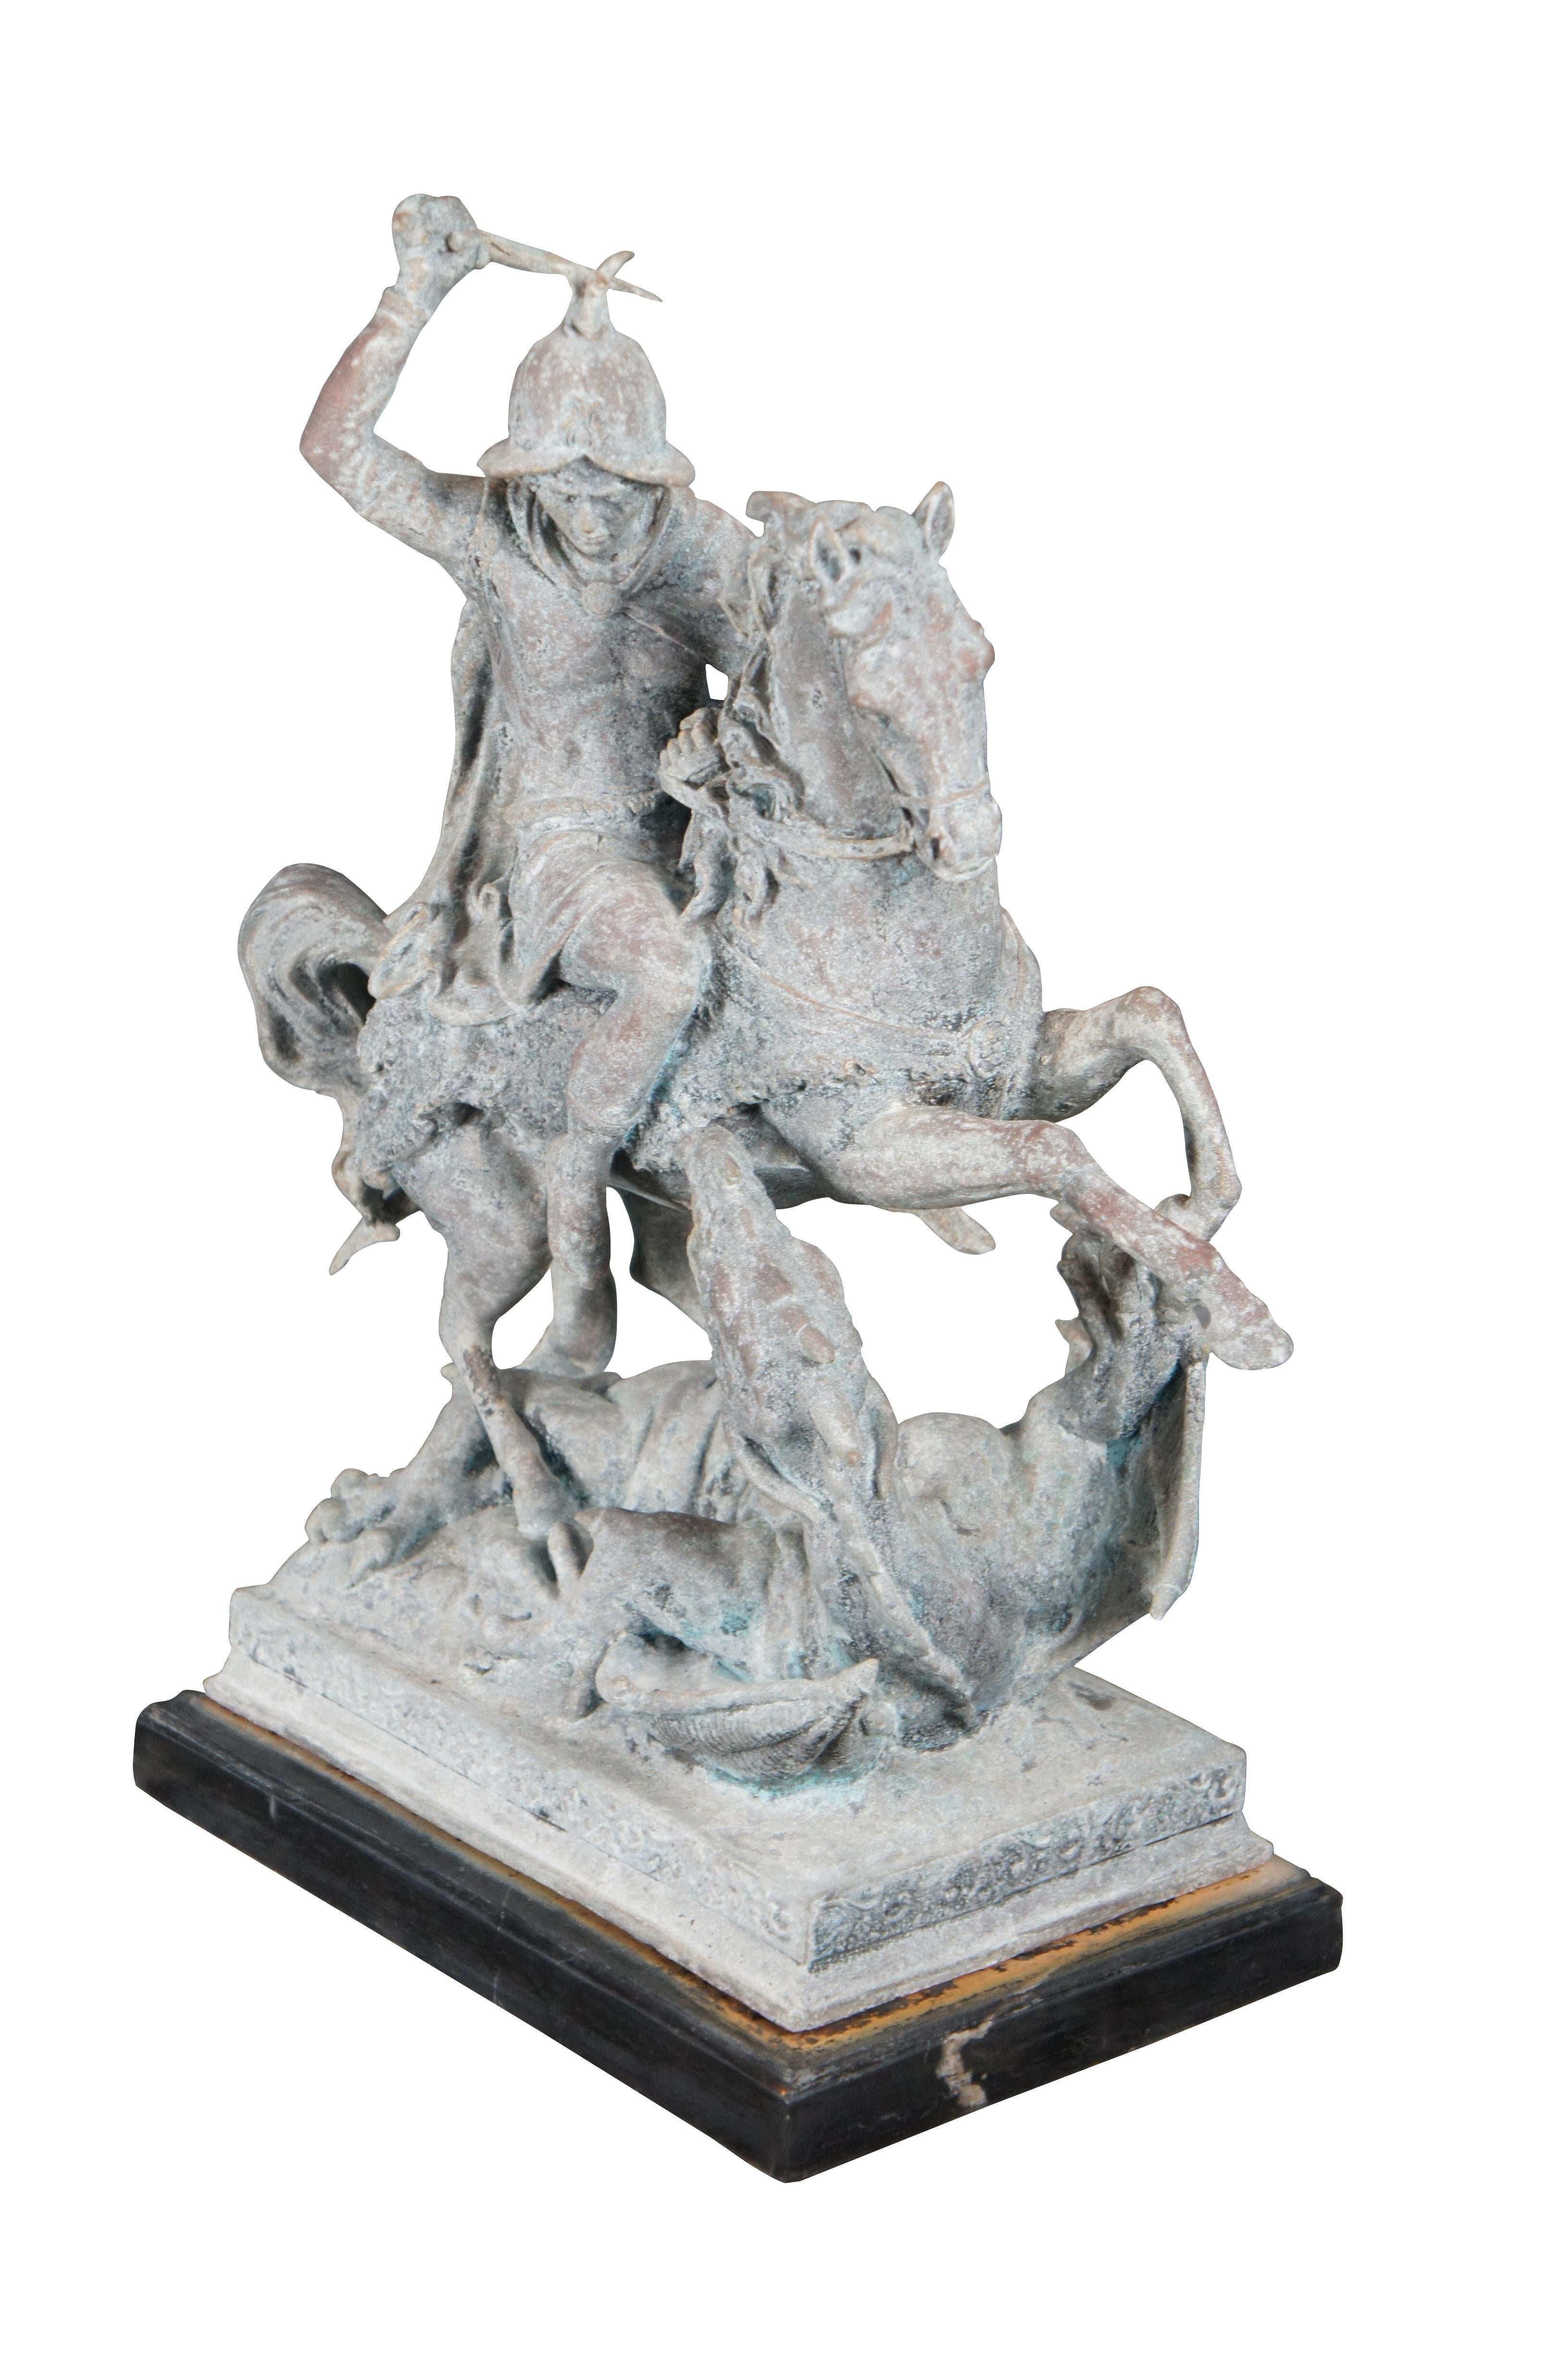 An eye caching figural sculpture of Saint George and the Dragon, After Antoine Louis Barye. As the legend goes, Saint George—a soldier venerated in Christianity—defeats a dragon. The story goes that the dragon originally extorted tribute from